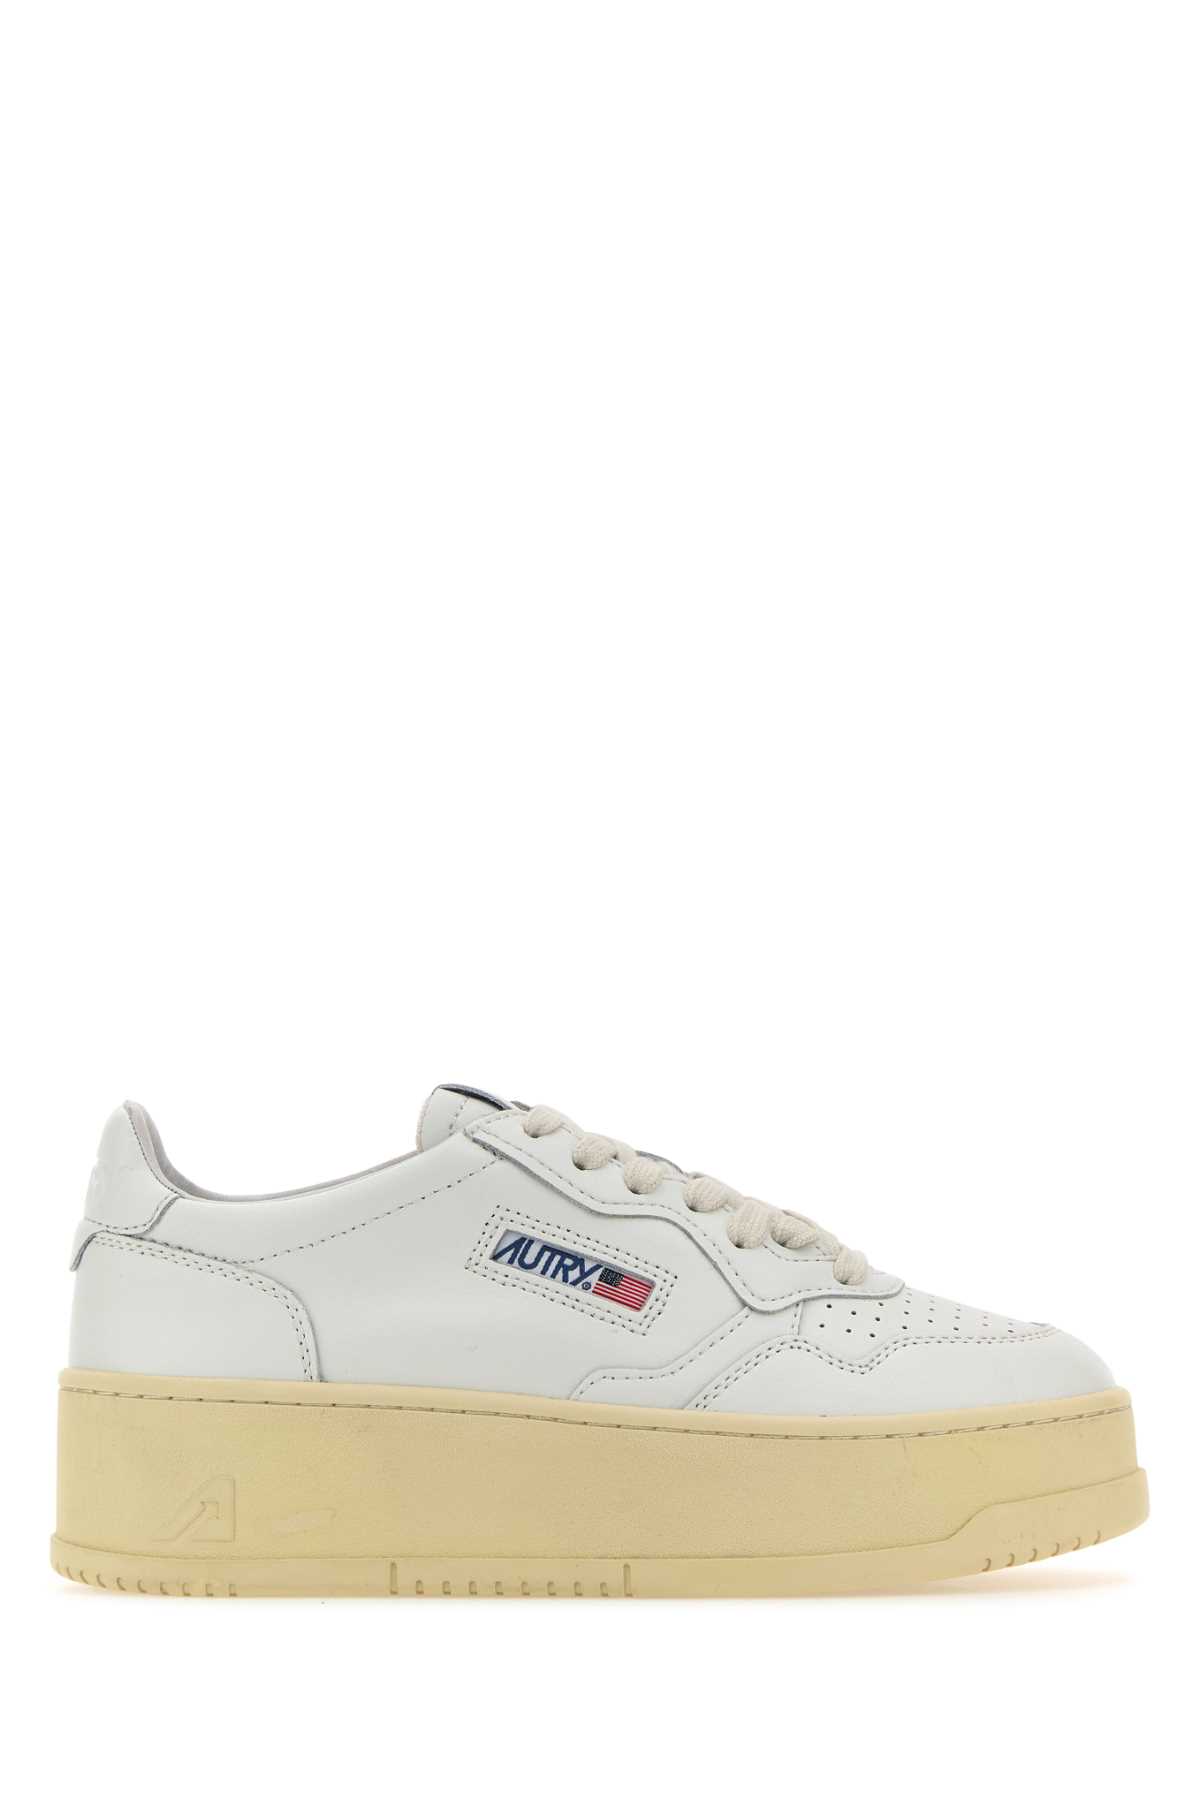 Autry White Leather Platform Low Wom Sneakers